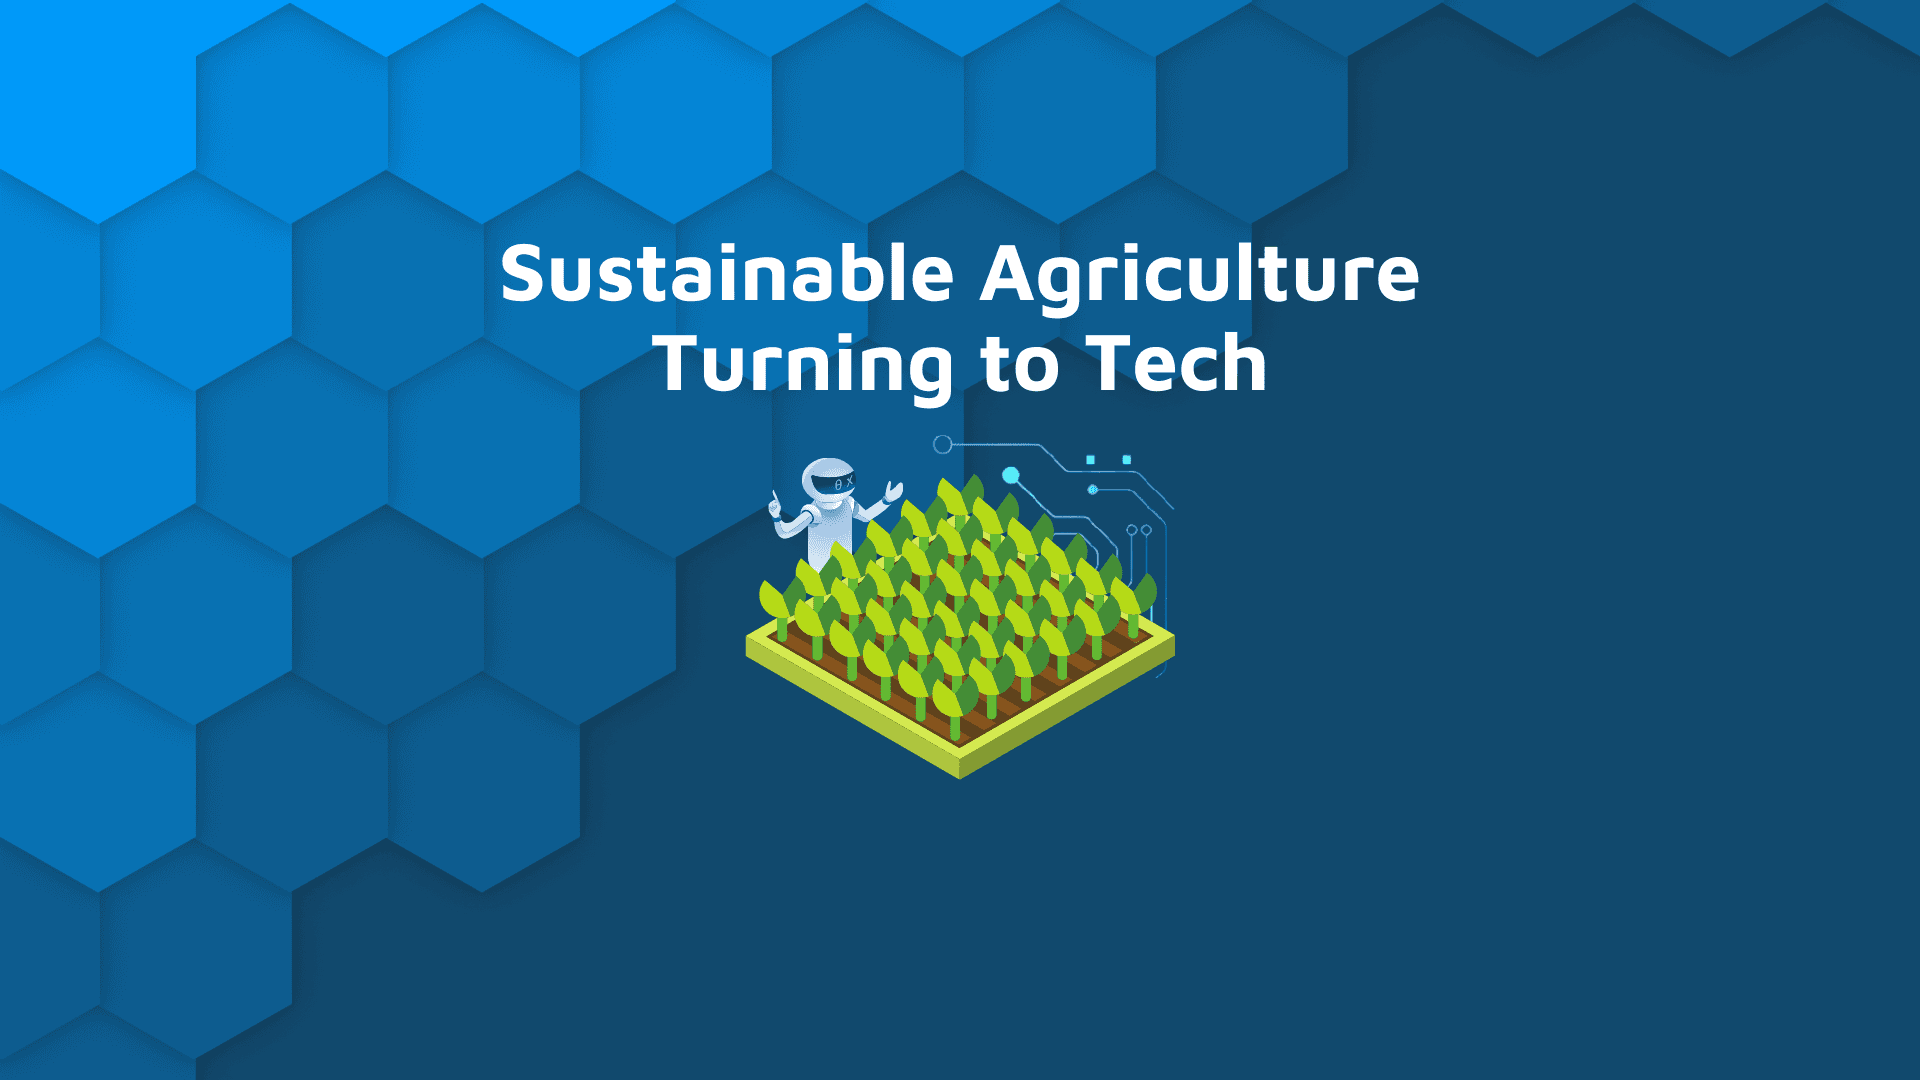 Sustainable Agriculture turning to AI and Tech